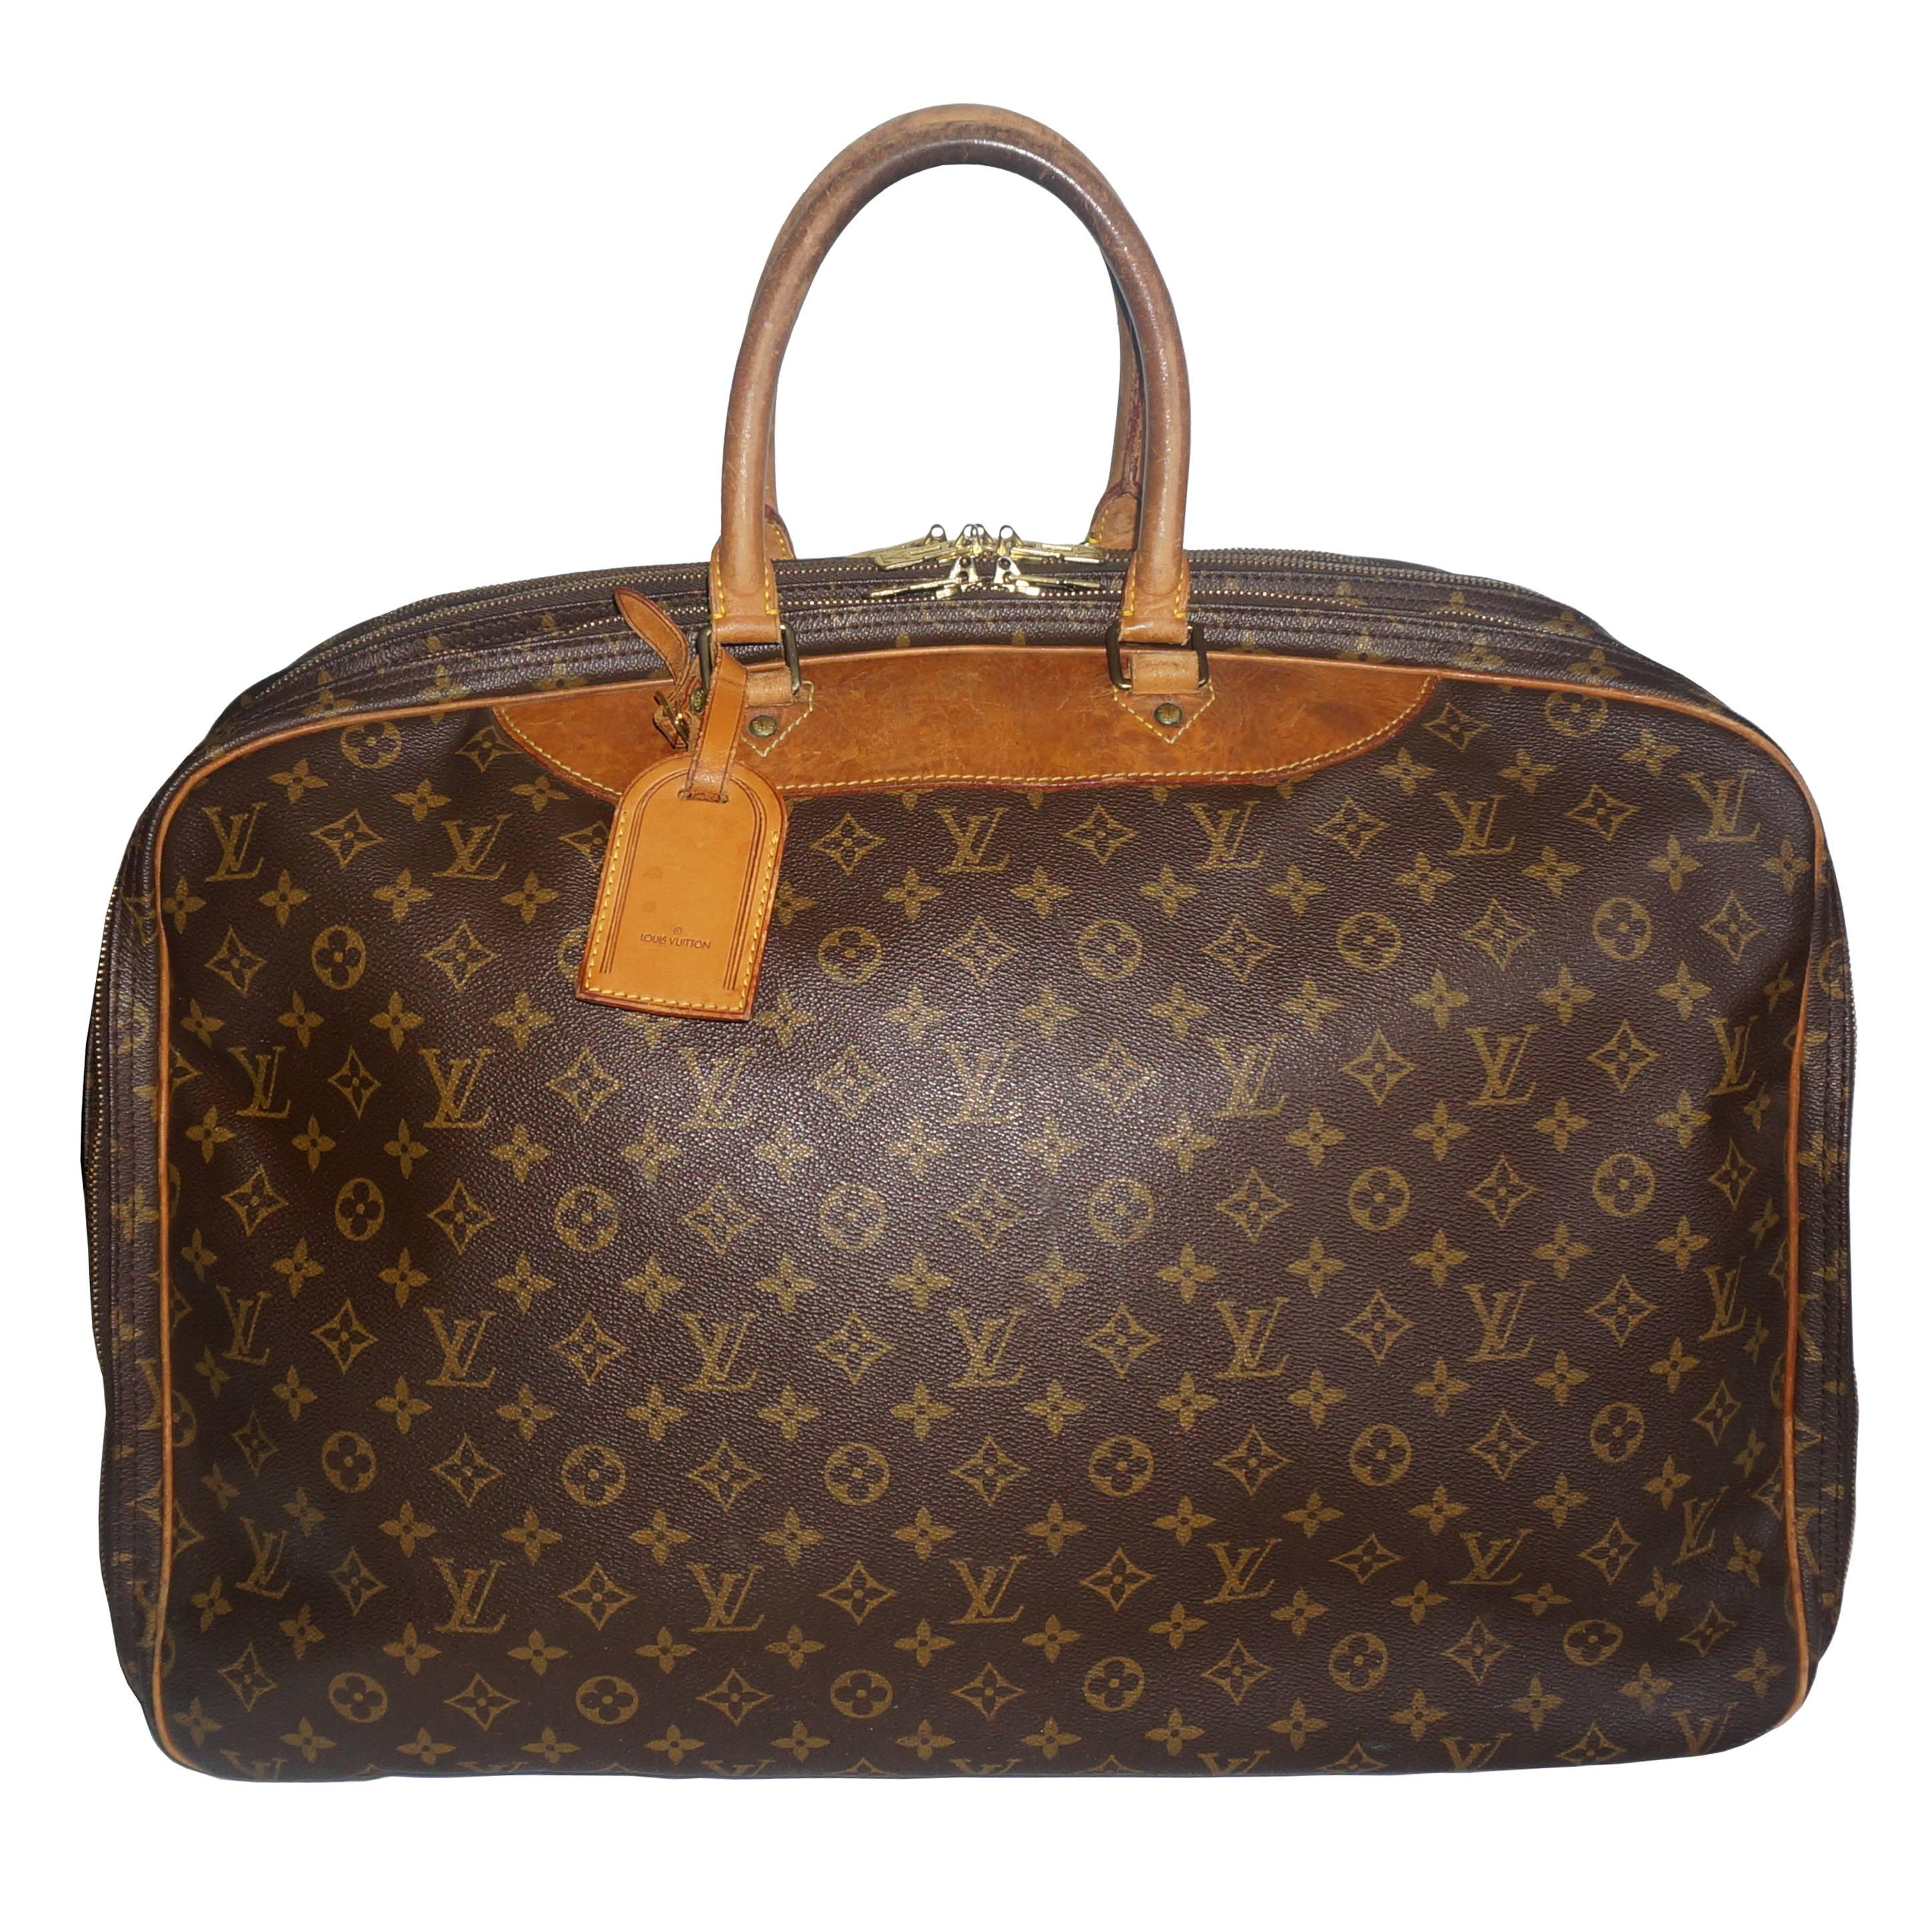  Louis Vuitton Weekender Bag with Iconic LV Monogram and Leather Trim